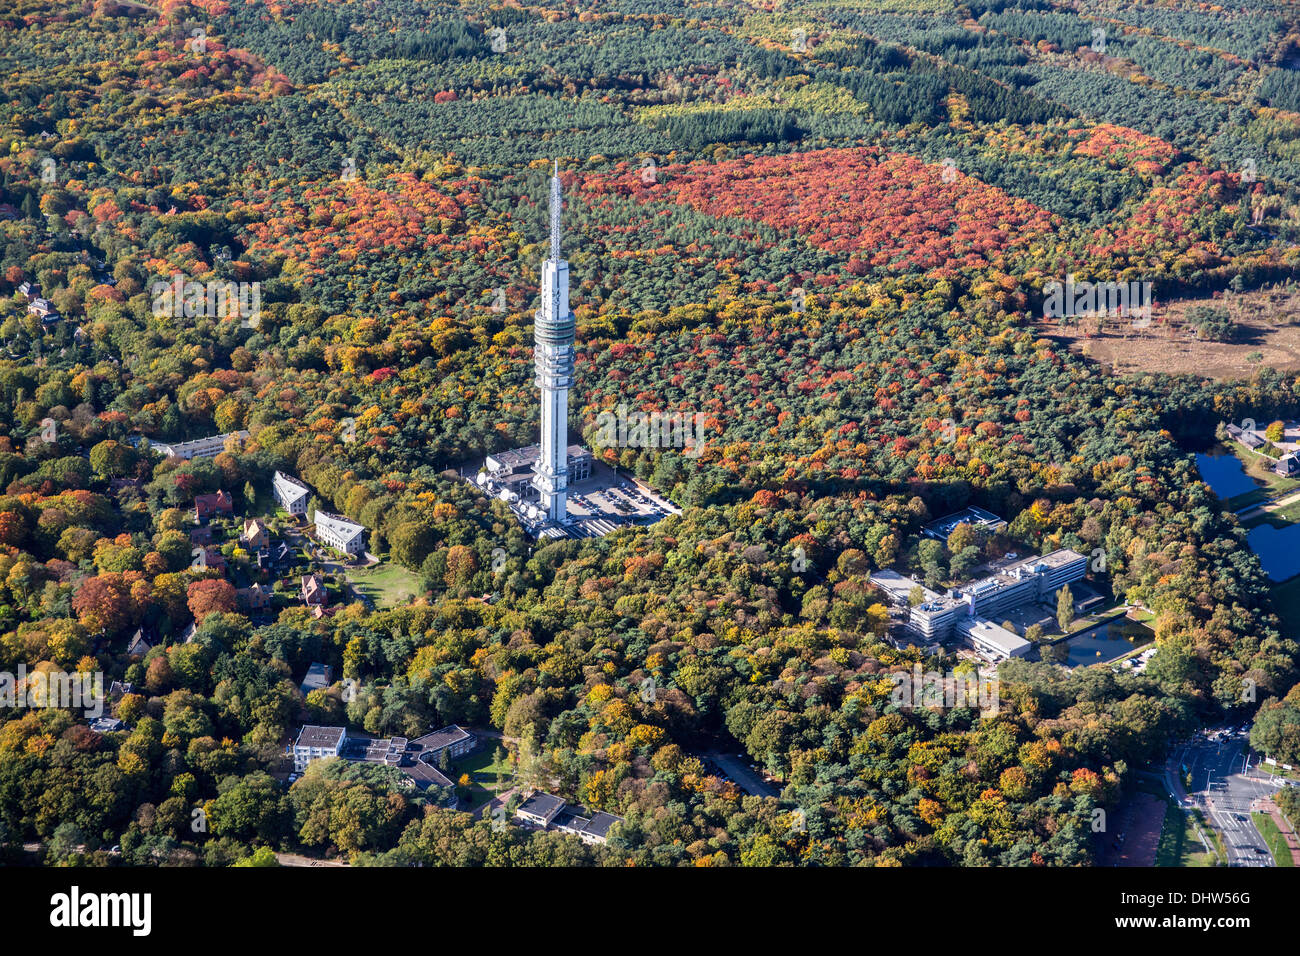 Netherlands, Hilversum, TV or Television broadcasting tower. Autumn colors. Aerial Stock Photo